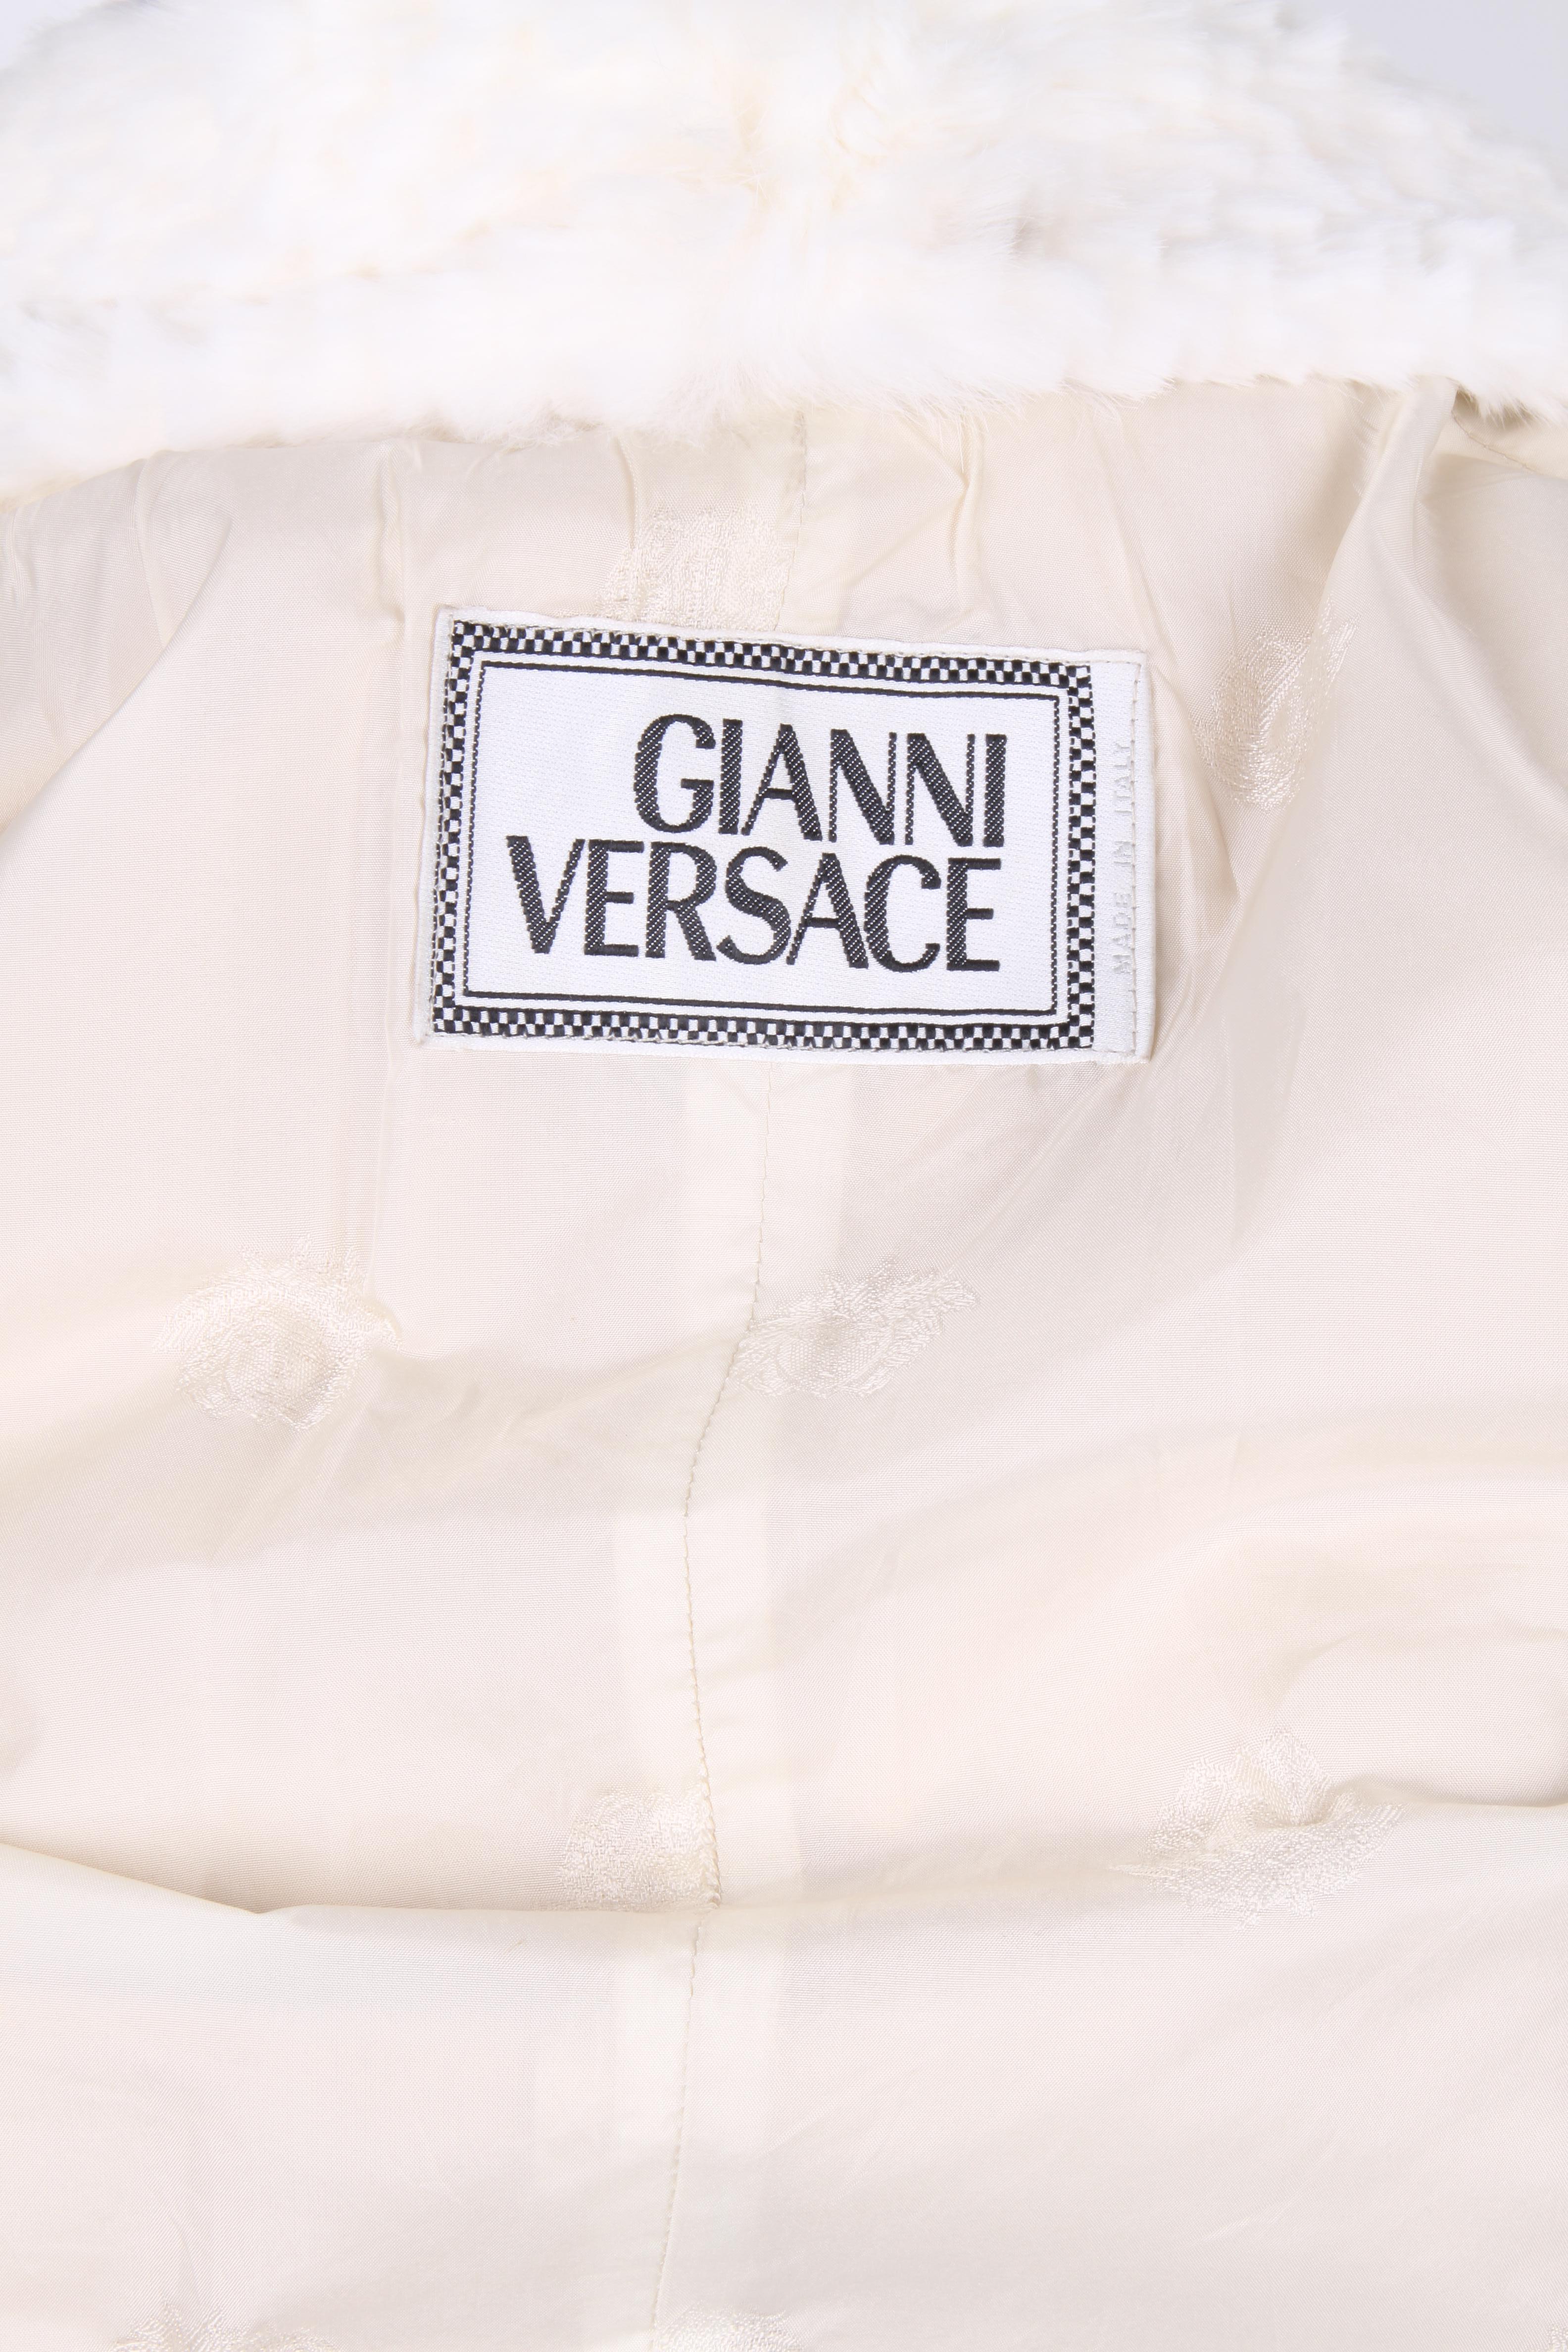 Gianni Versace Beige Leather Fur Jacket  For Sale 4